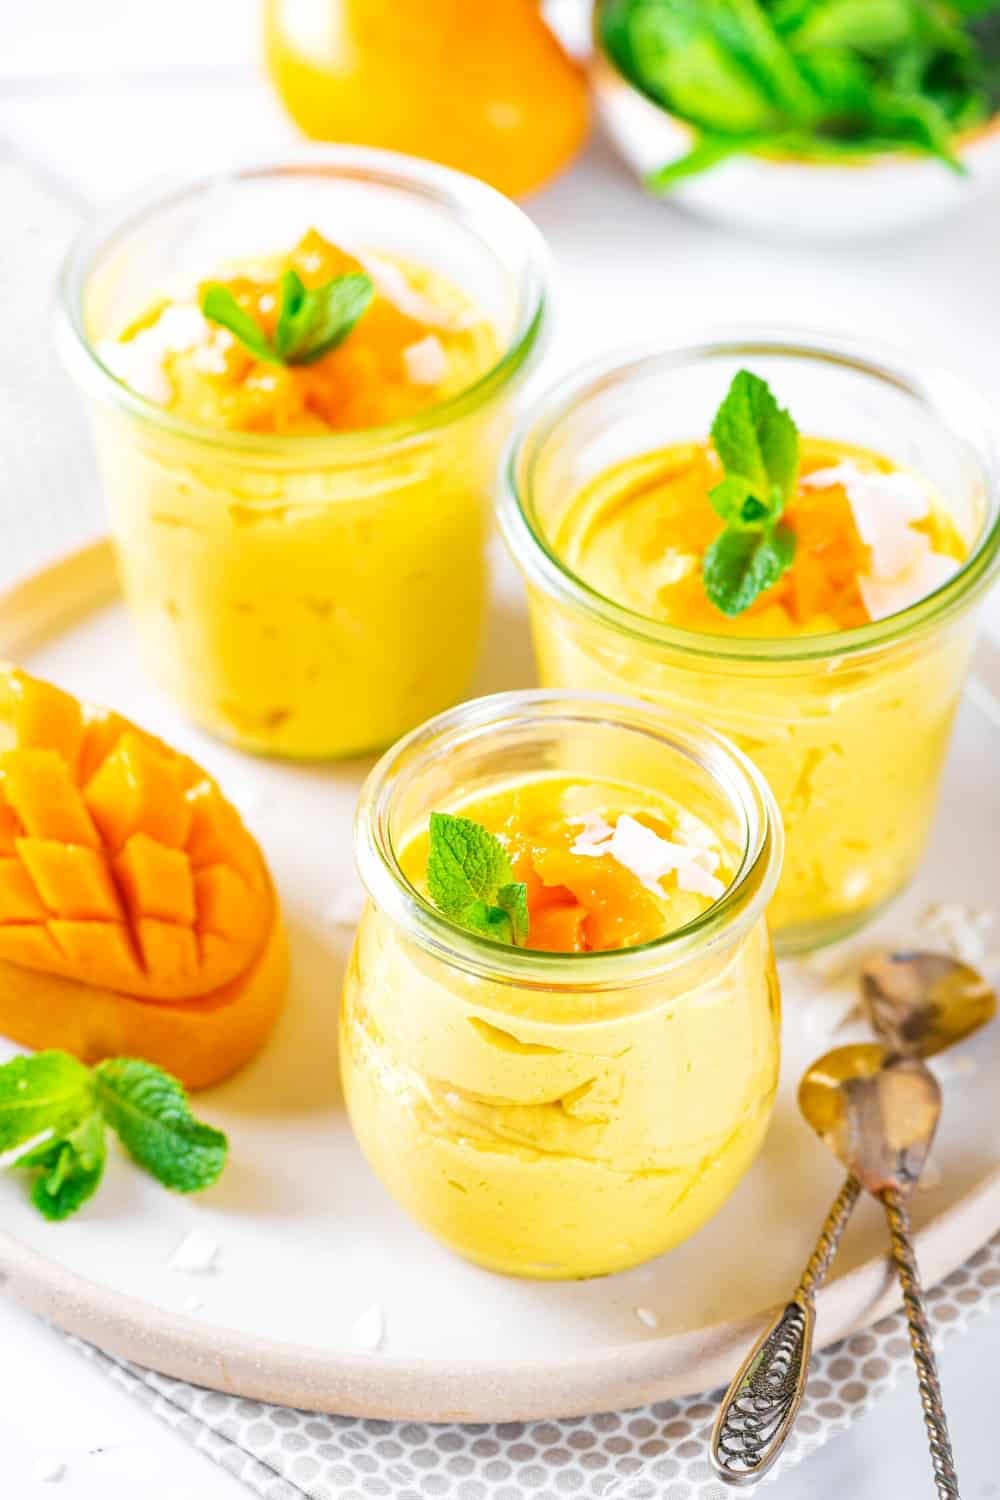 Mango Mousse Recipe Made in 5 Minutes With Just 3 Ingredients...